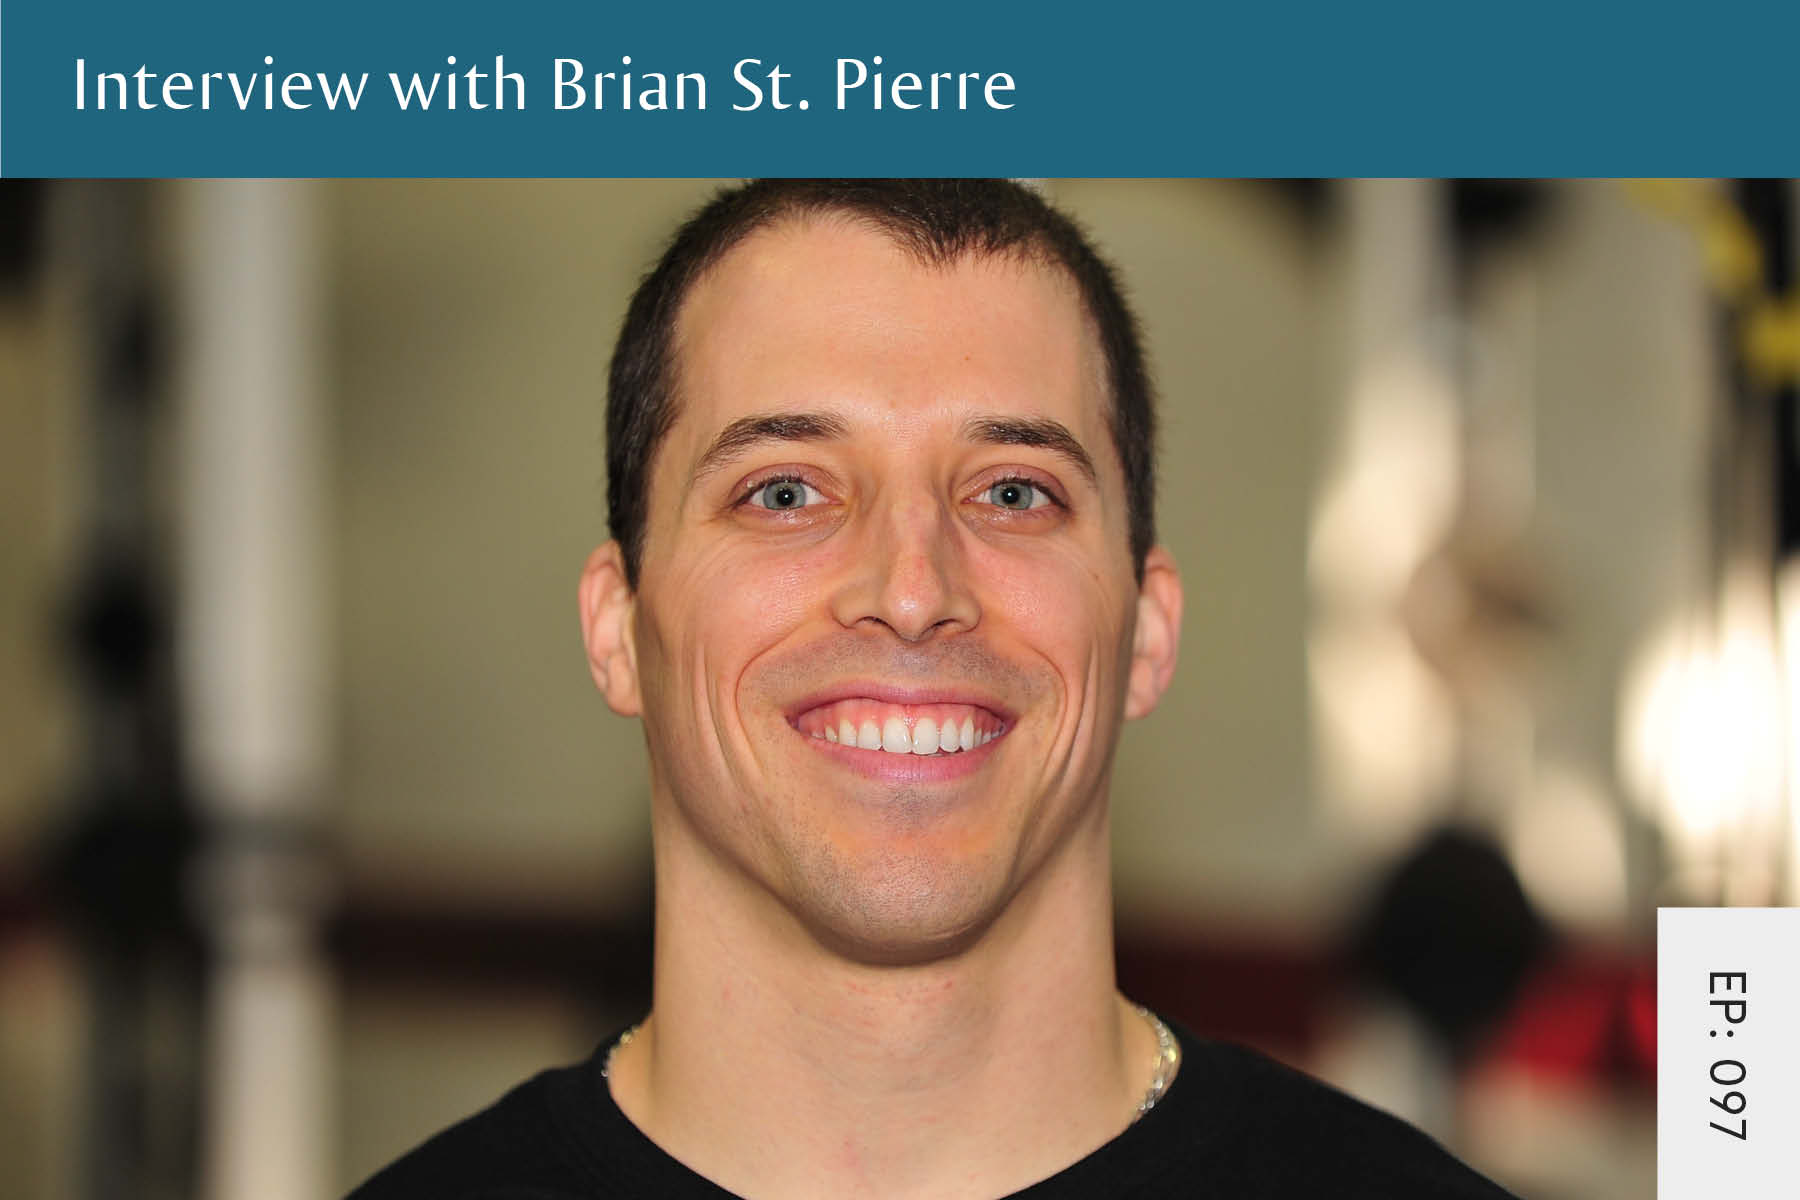 097: Interview with Brian St. Pierre - Seven Health: Eating Disorder Recovery and Anti Diet Nutritionist